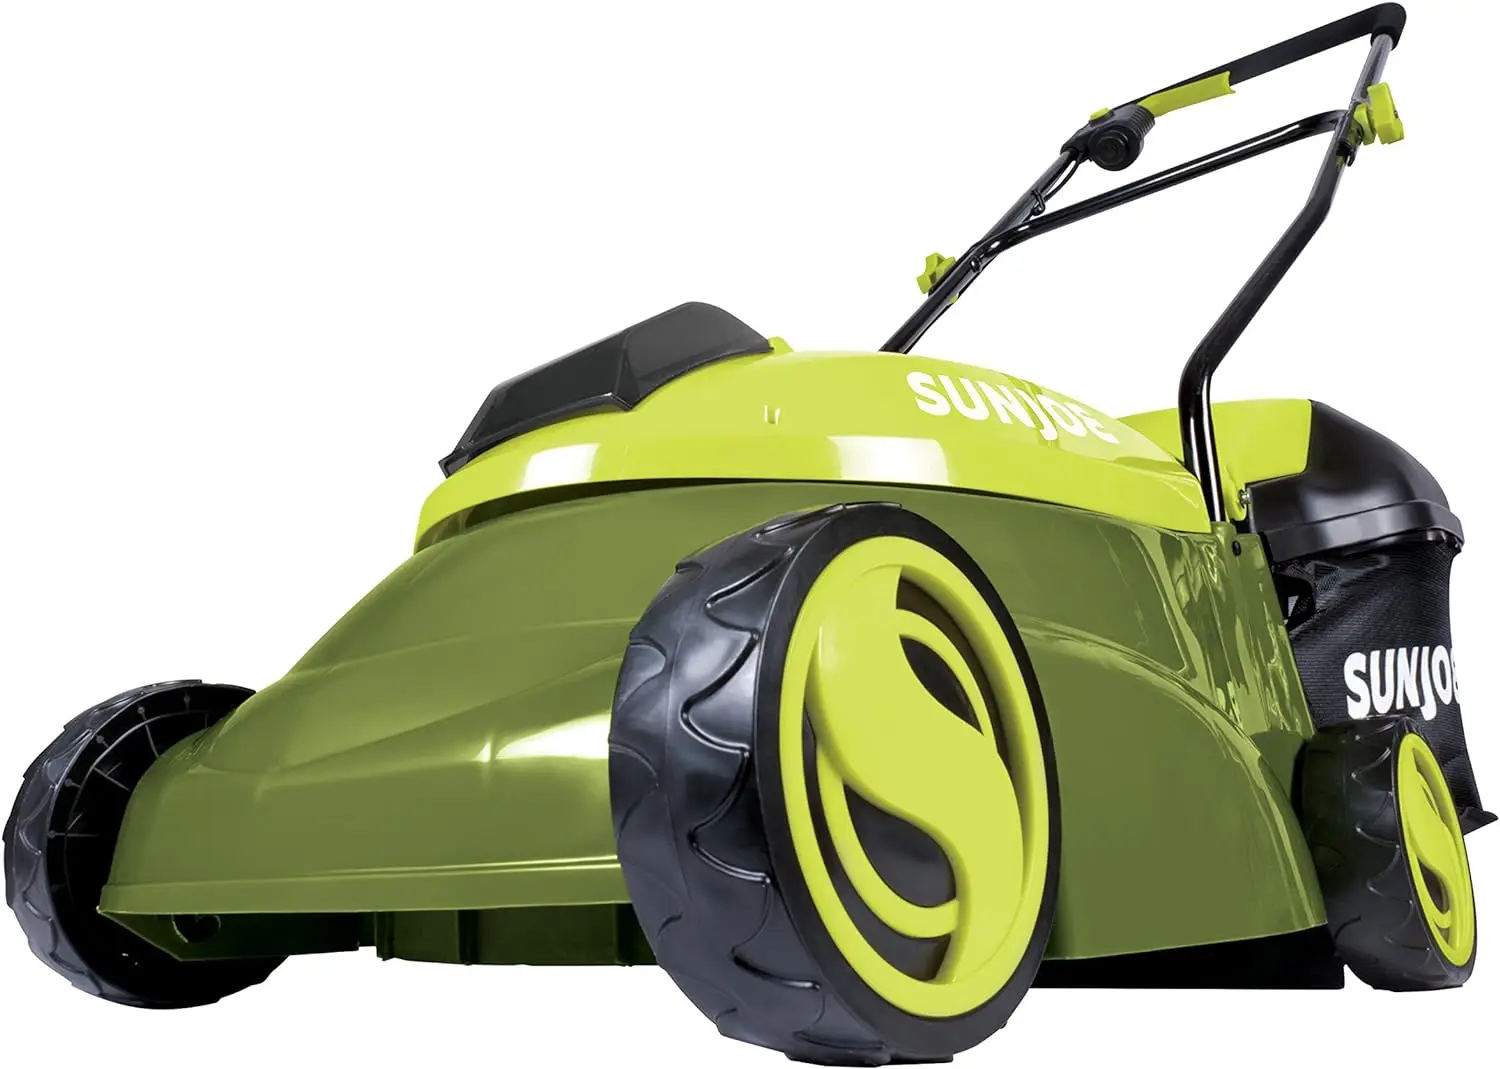 

MJ401C-XR 14-Inch 28-Volt 5-Amp Cordless Lawn Mower w/Brushless Motor, 10.6-Gallon Detachable Collection Bag, Lightweight, Green